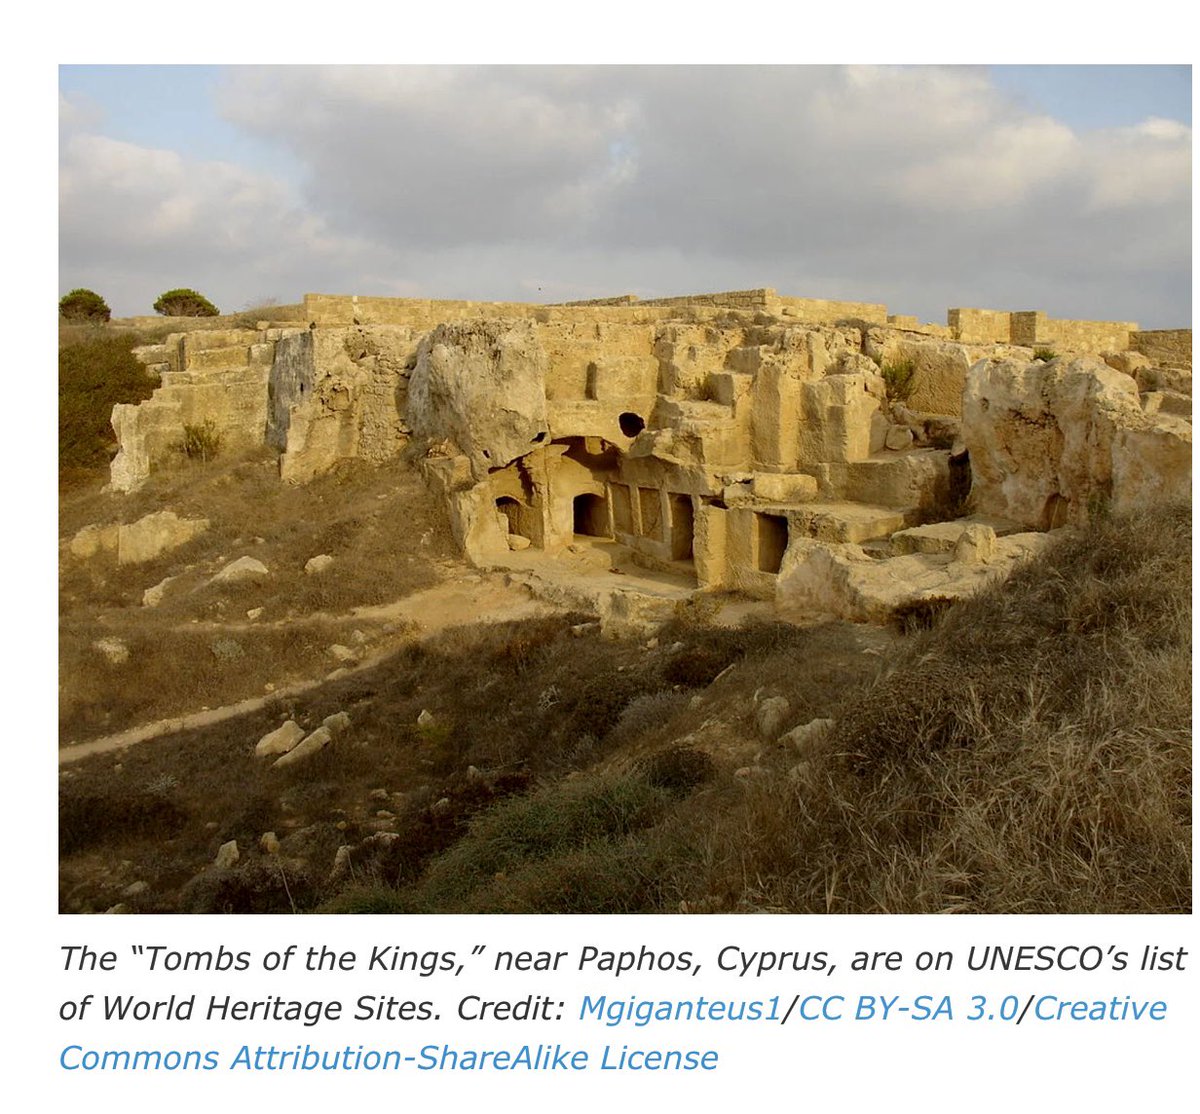 The Tombs of the Kings in Paphos, Cyprus are Unique UNESCO Site 

greekreporter.com/2023/08/27/tom… 

#Cyprus #Archaeology #Paphos #Pafos #Cypriot #tombs #kings #UNESCO #TombOfTheKings #visitCyprus #loveCyprus #CyprusArchaeology